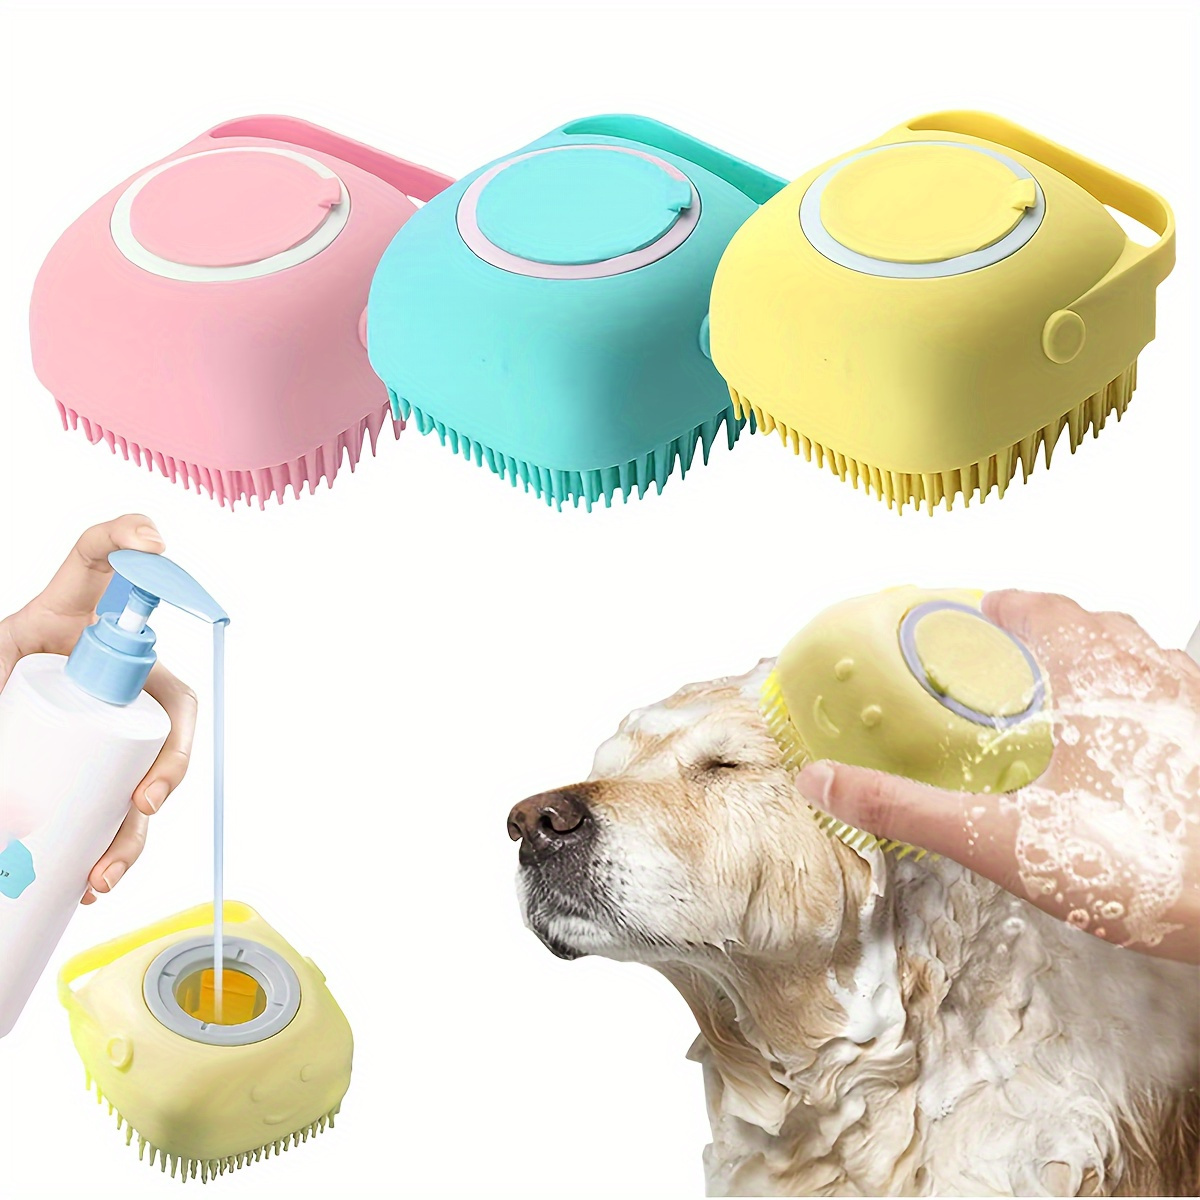 

2-in-1 Dog Bath & Massage Brush With Shampoo Dispenser - Soft Silicone, Gentle On Skin, Vibrant Colors